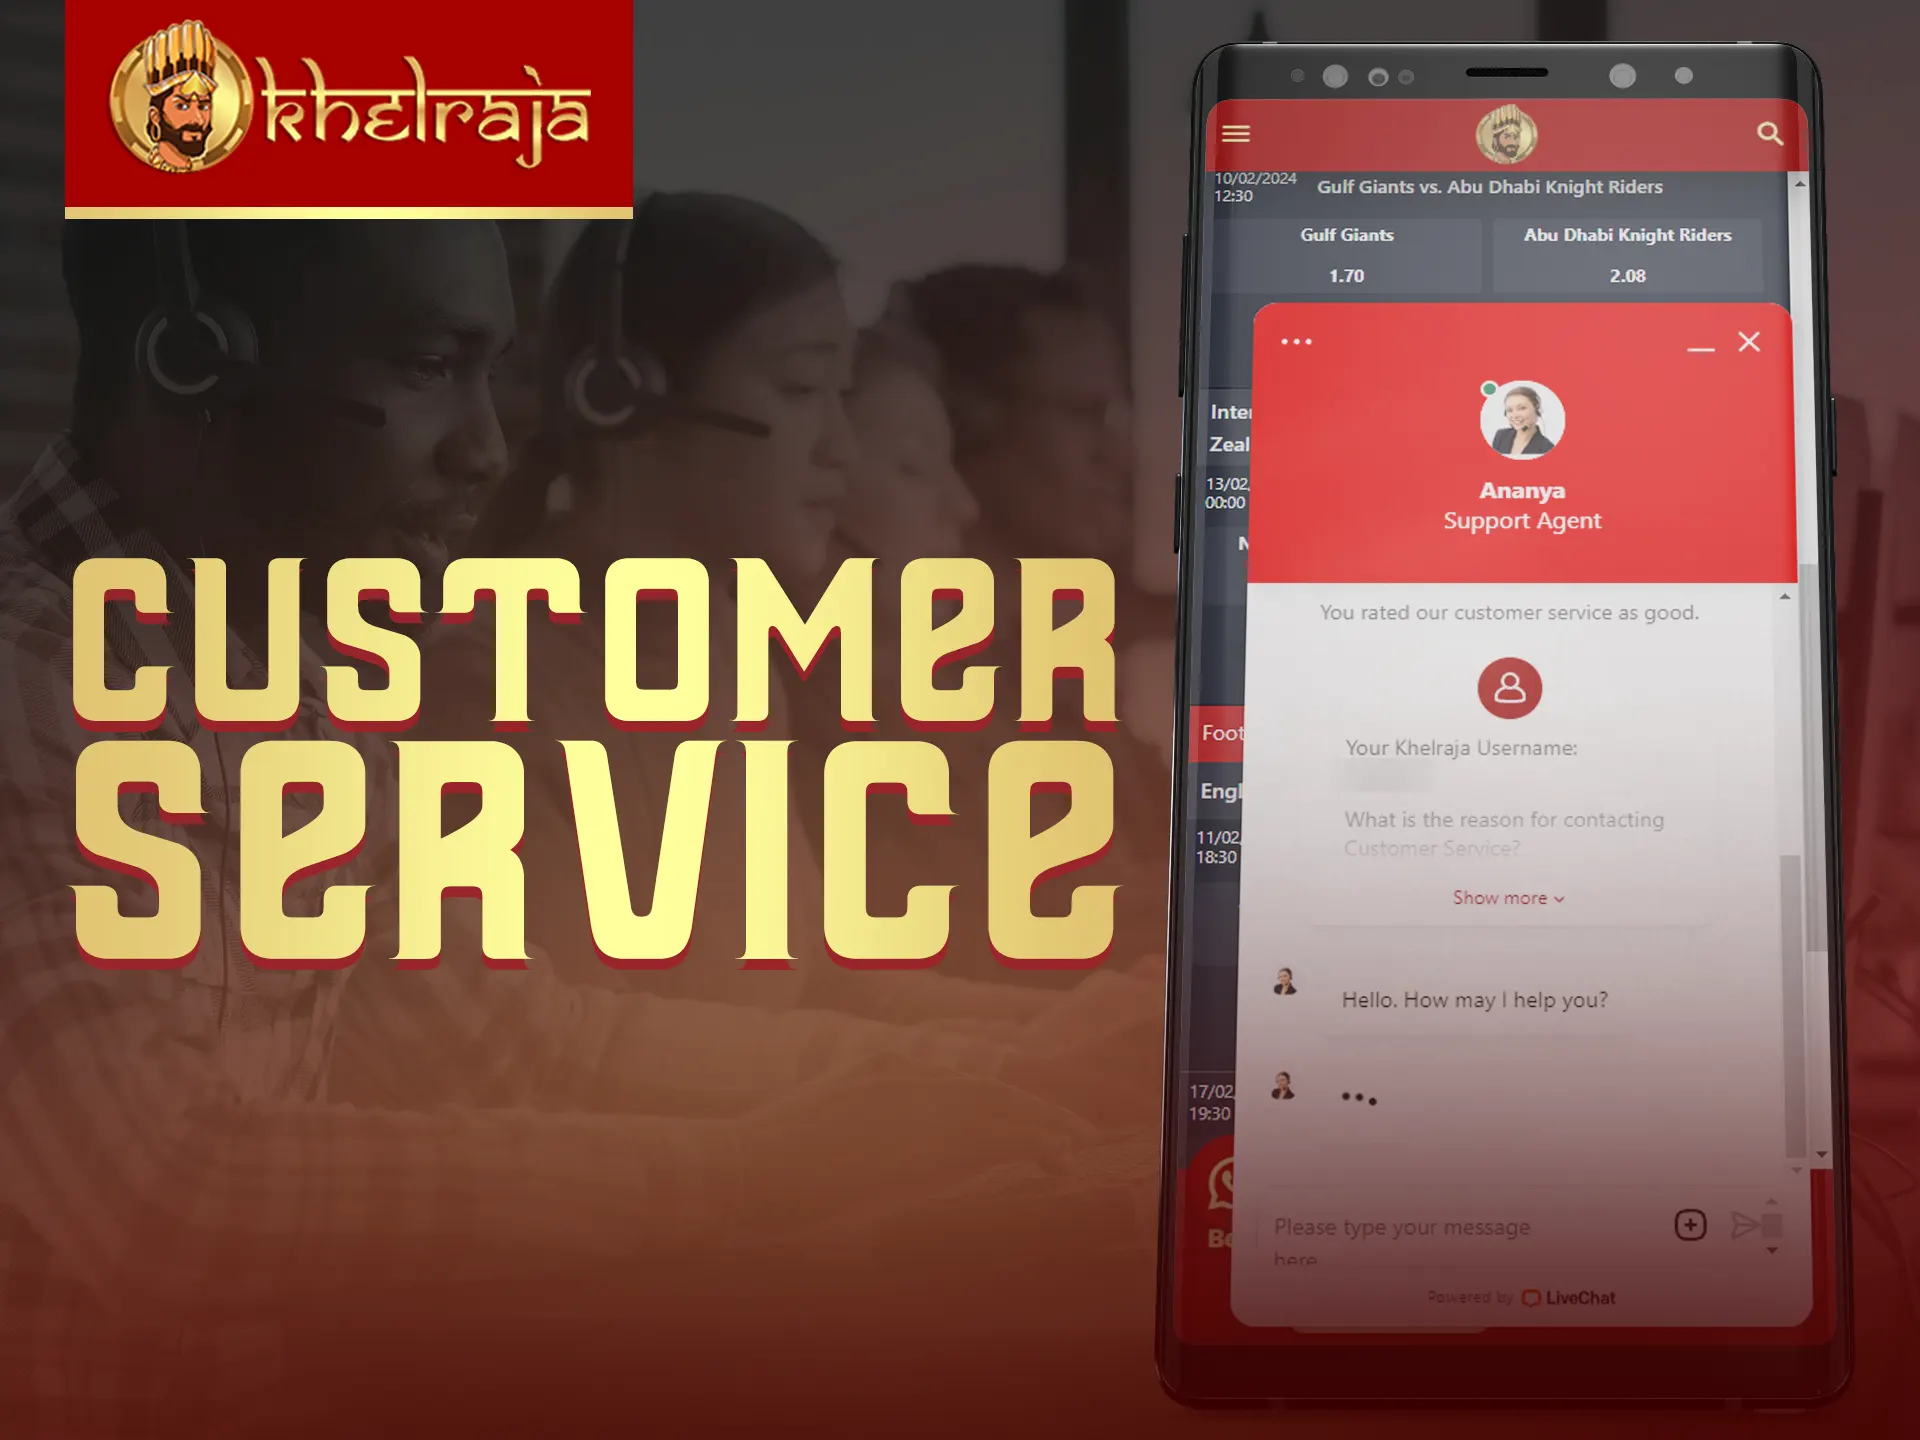 Khelraja provides reliable customer support services.